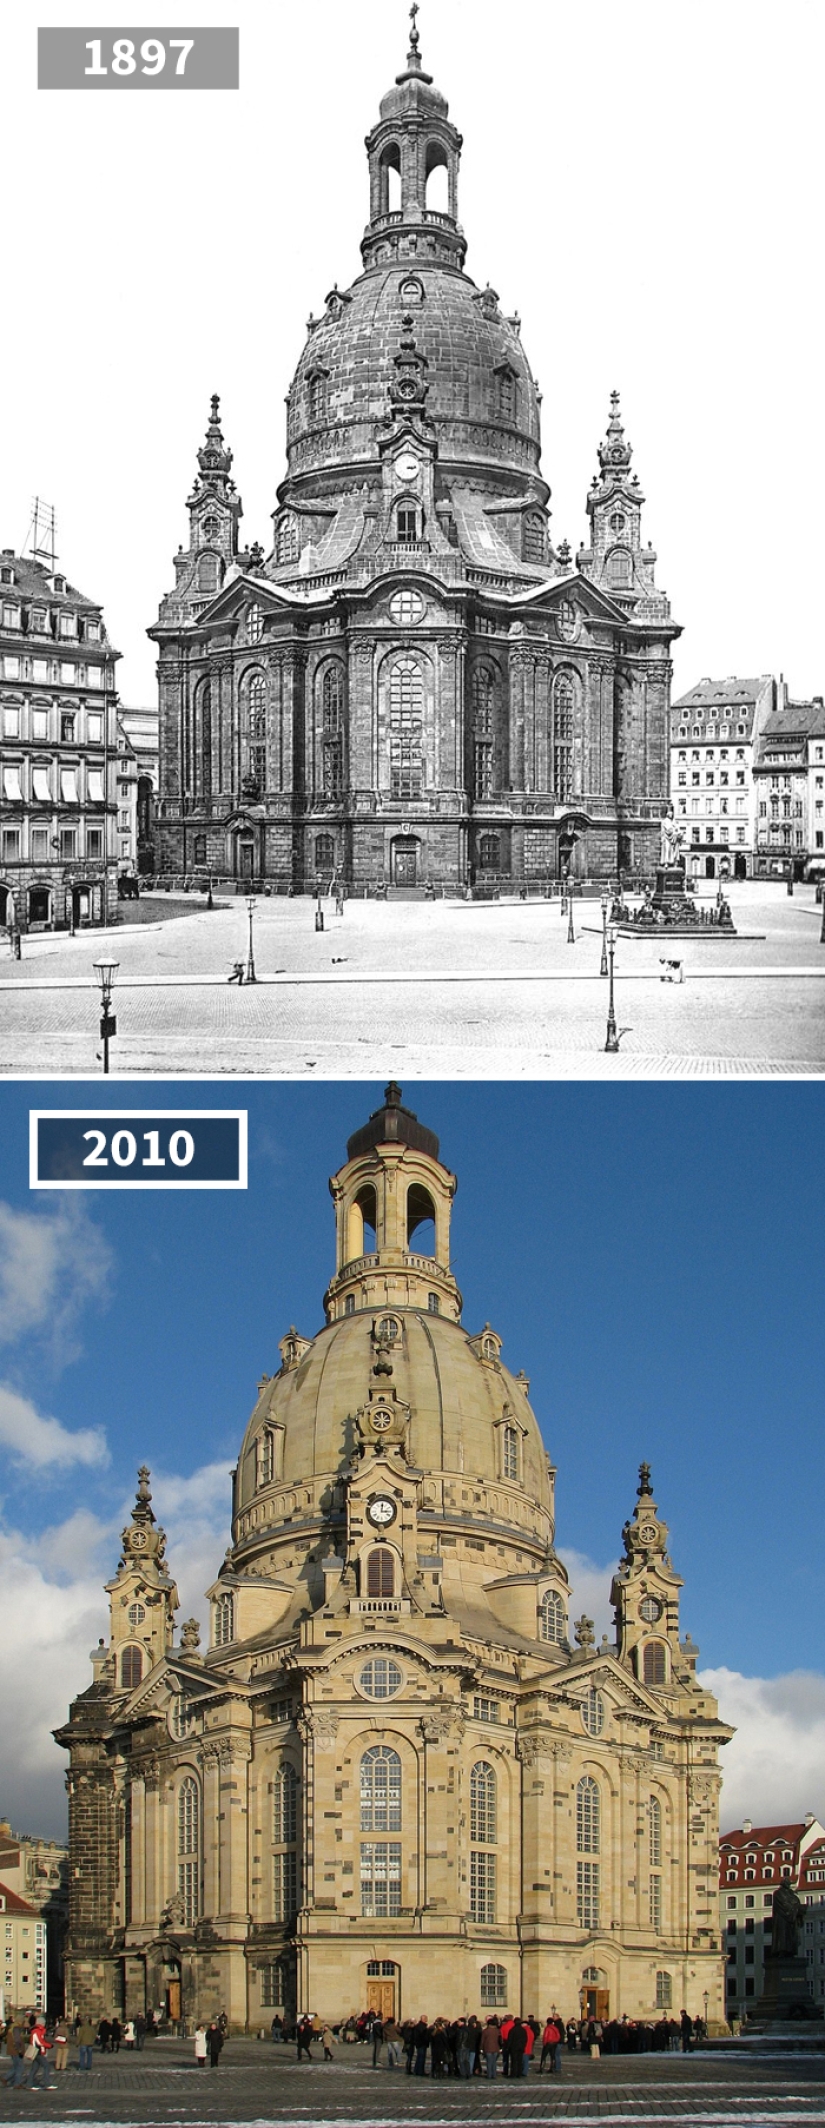 How the world has changed in 100 years: before and after photos